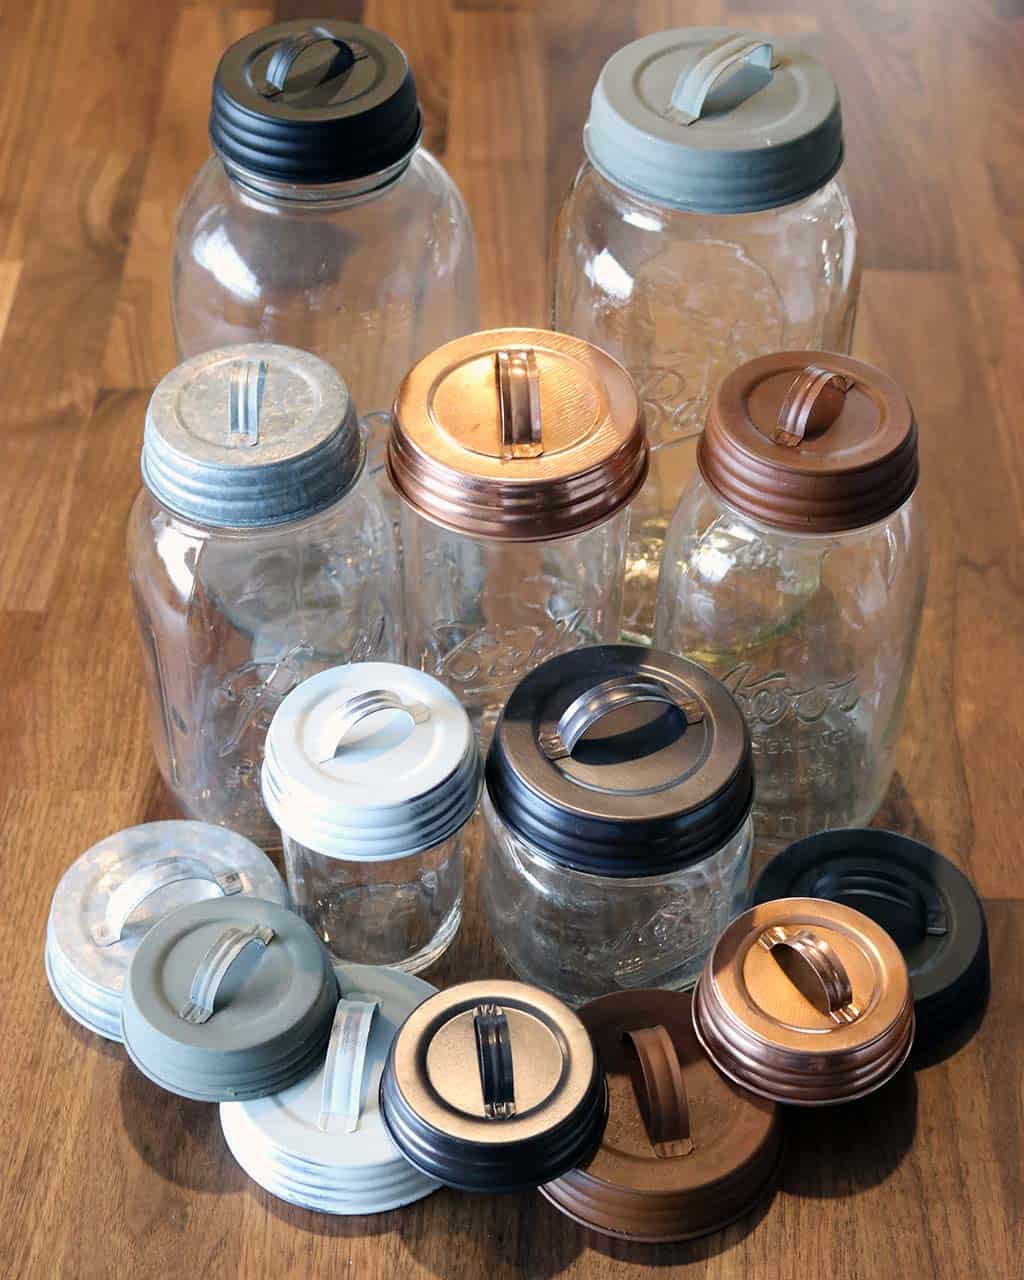 Seven kinds of decorative handle / canister lids for regular and wide mouth Mason jars